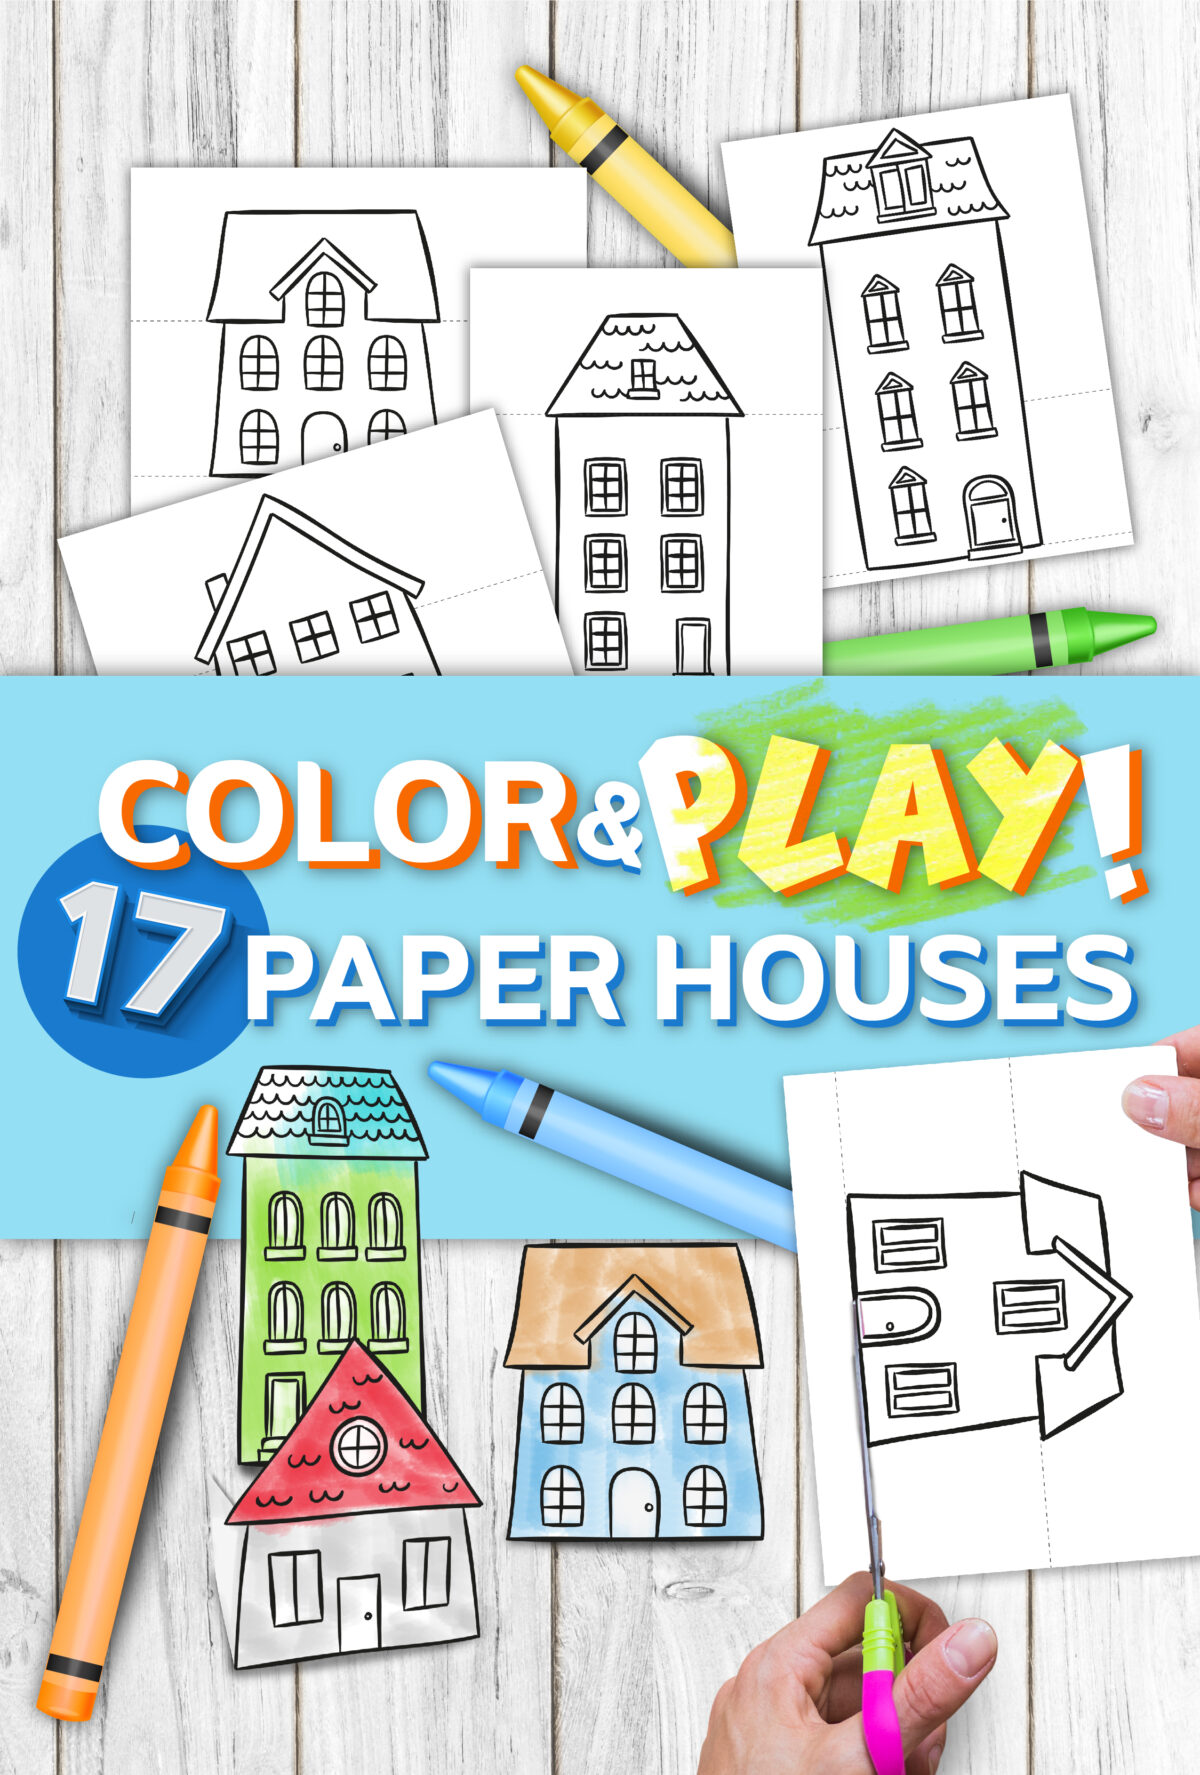 Download and print these free Paper House Crafts - includes 17 different designs that can be coloured and played with for hours of free fun!